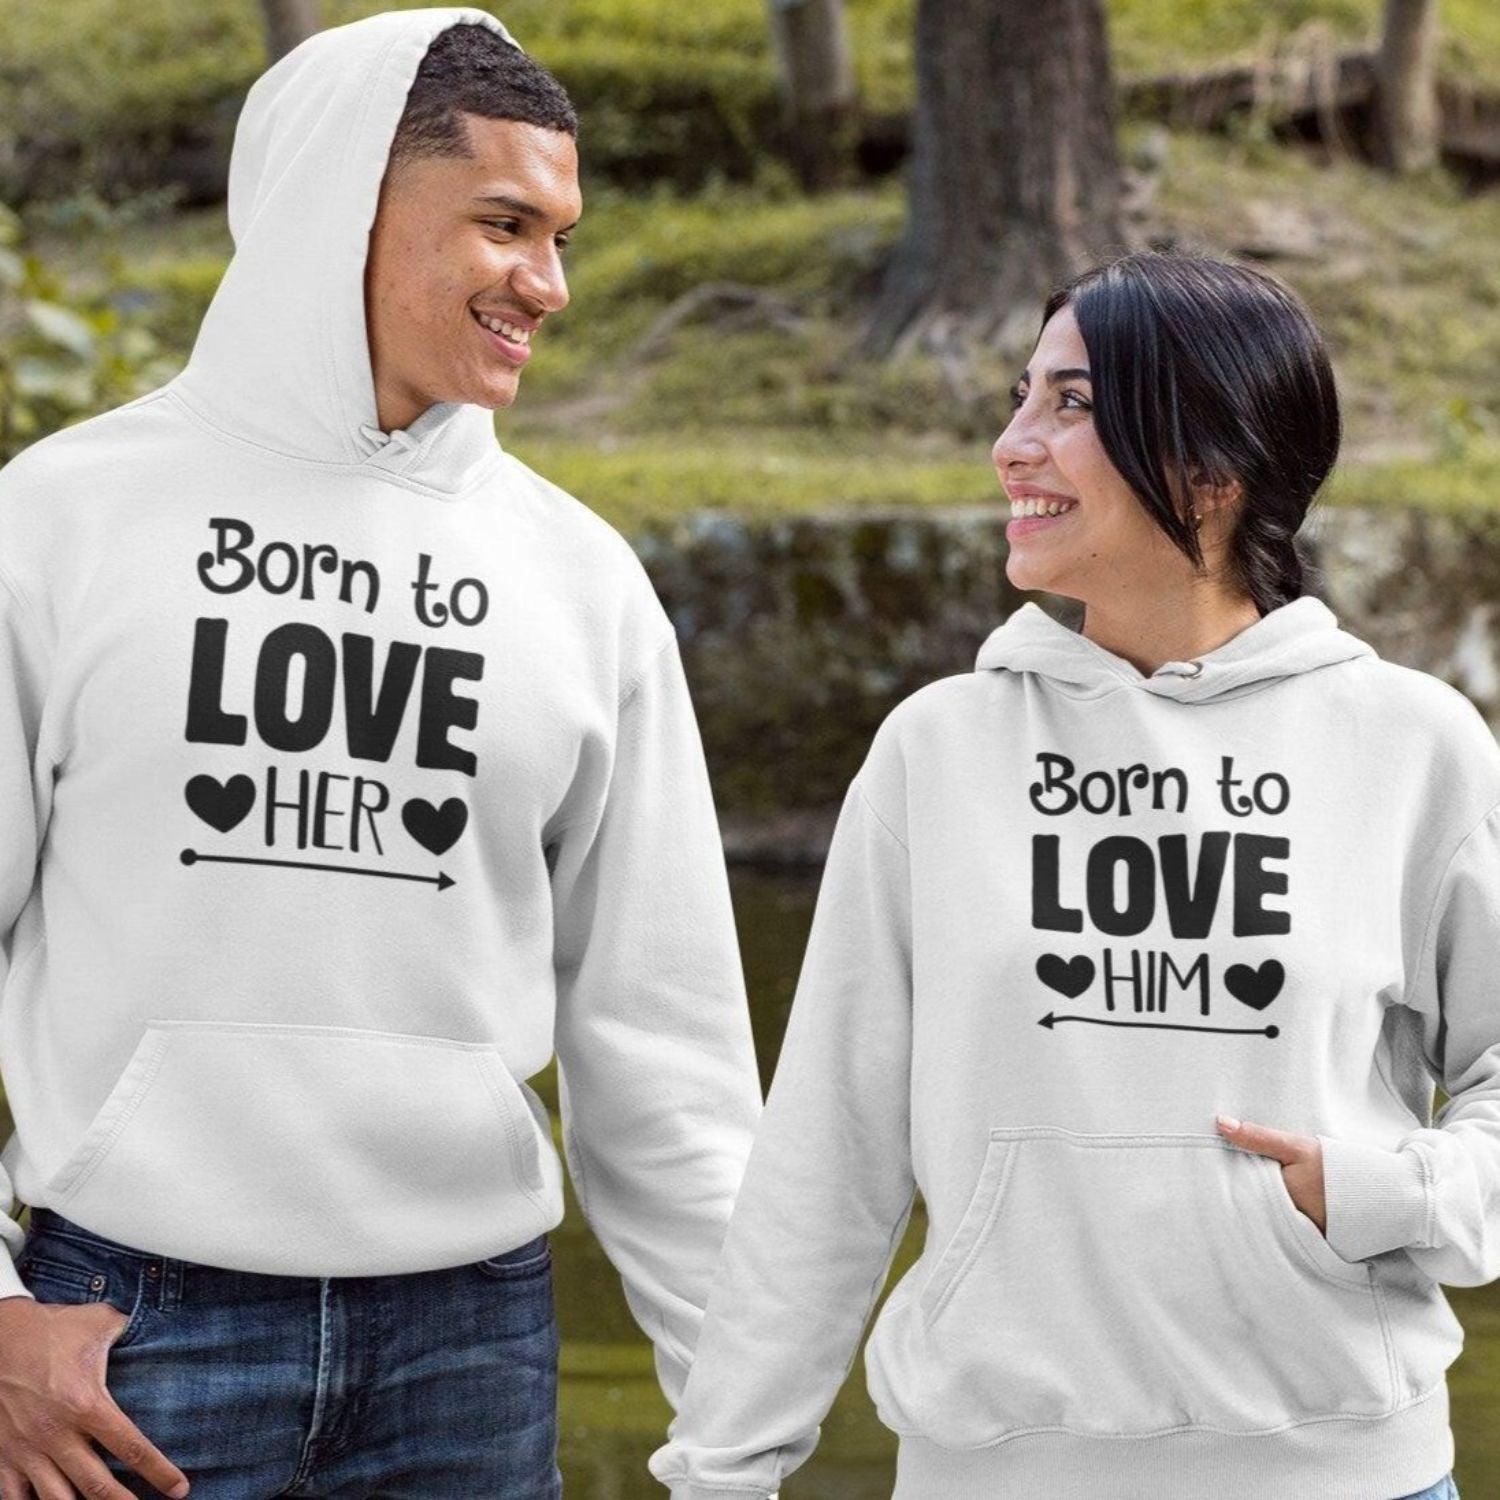 Gift for Couples: Twinning Ensemble - 'Born to Love Her/Him' Complementary Attires. - 4Lovebirds